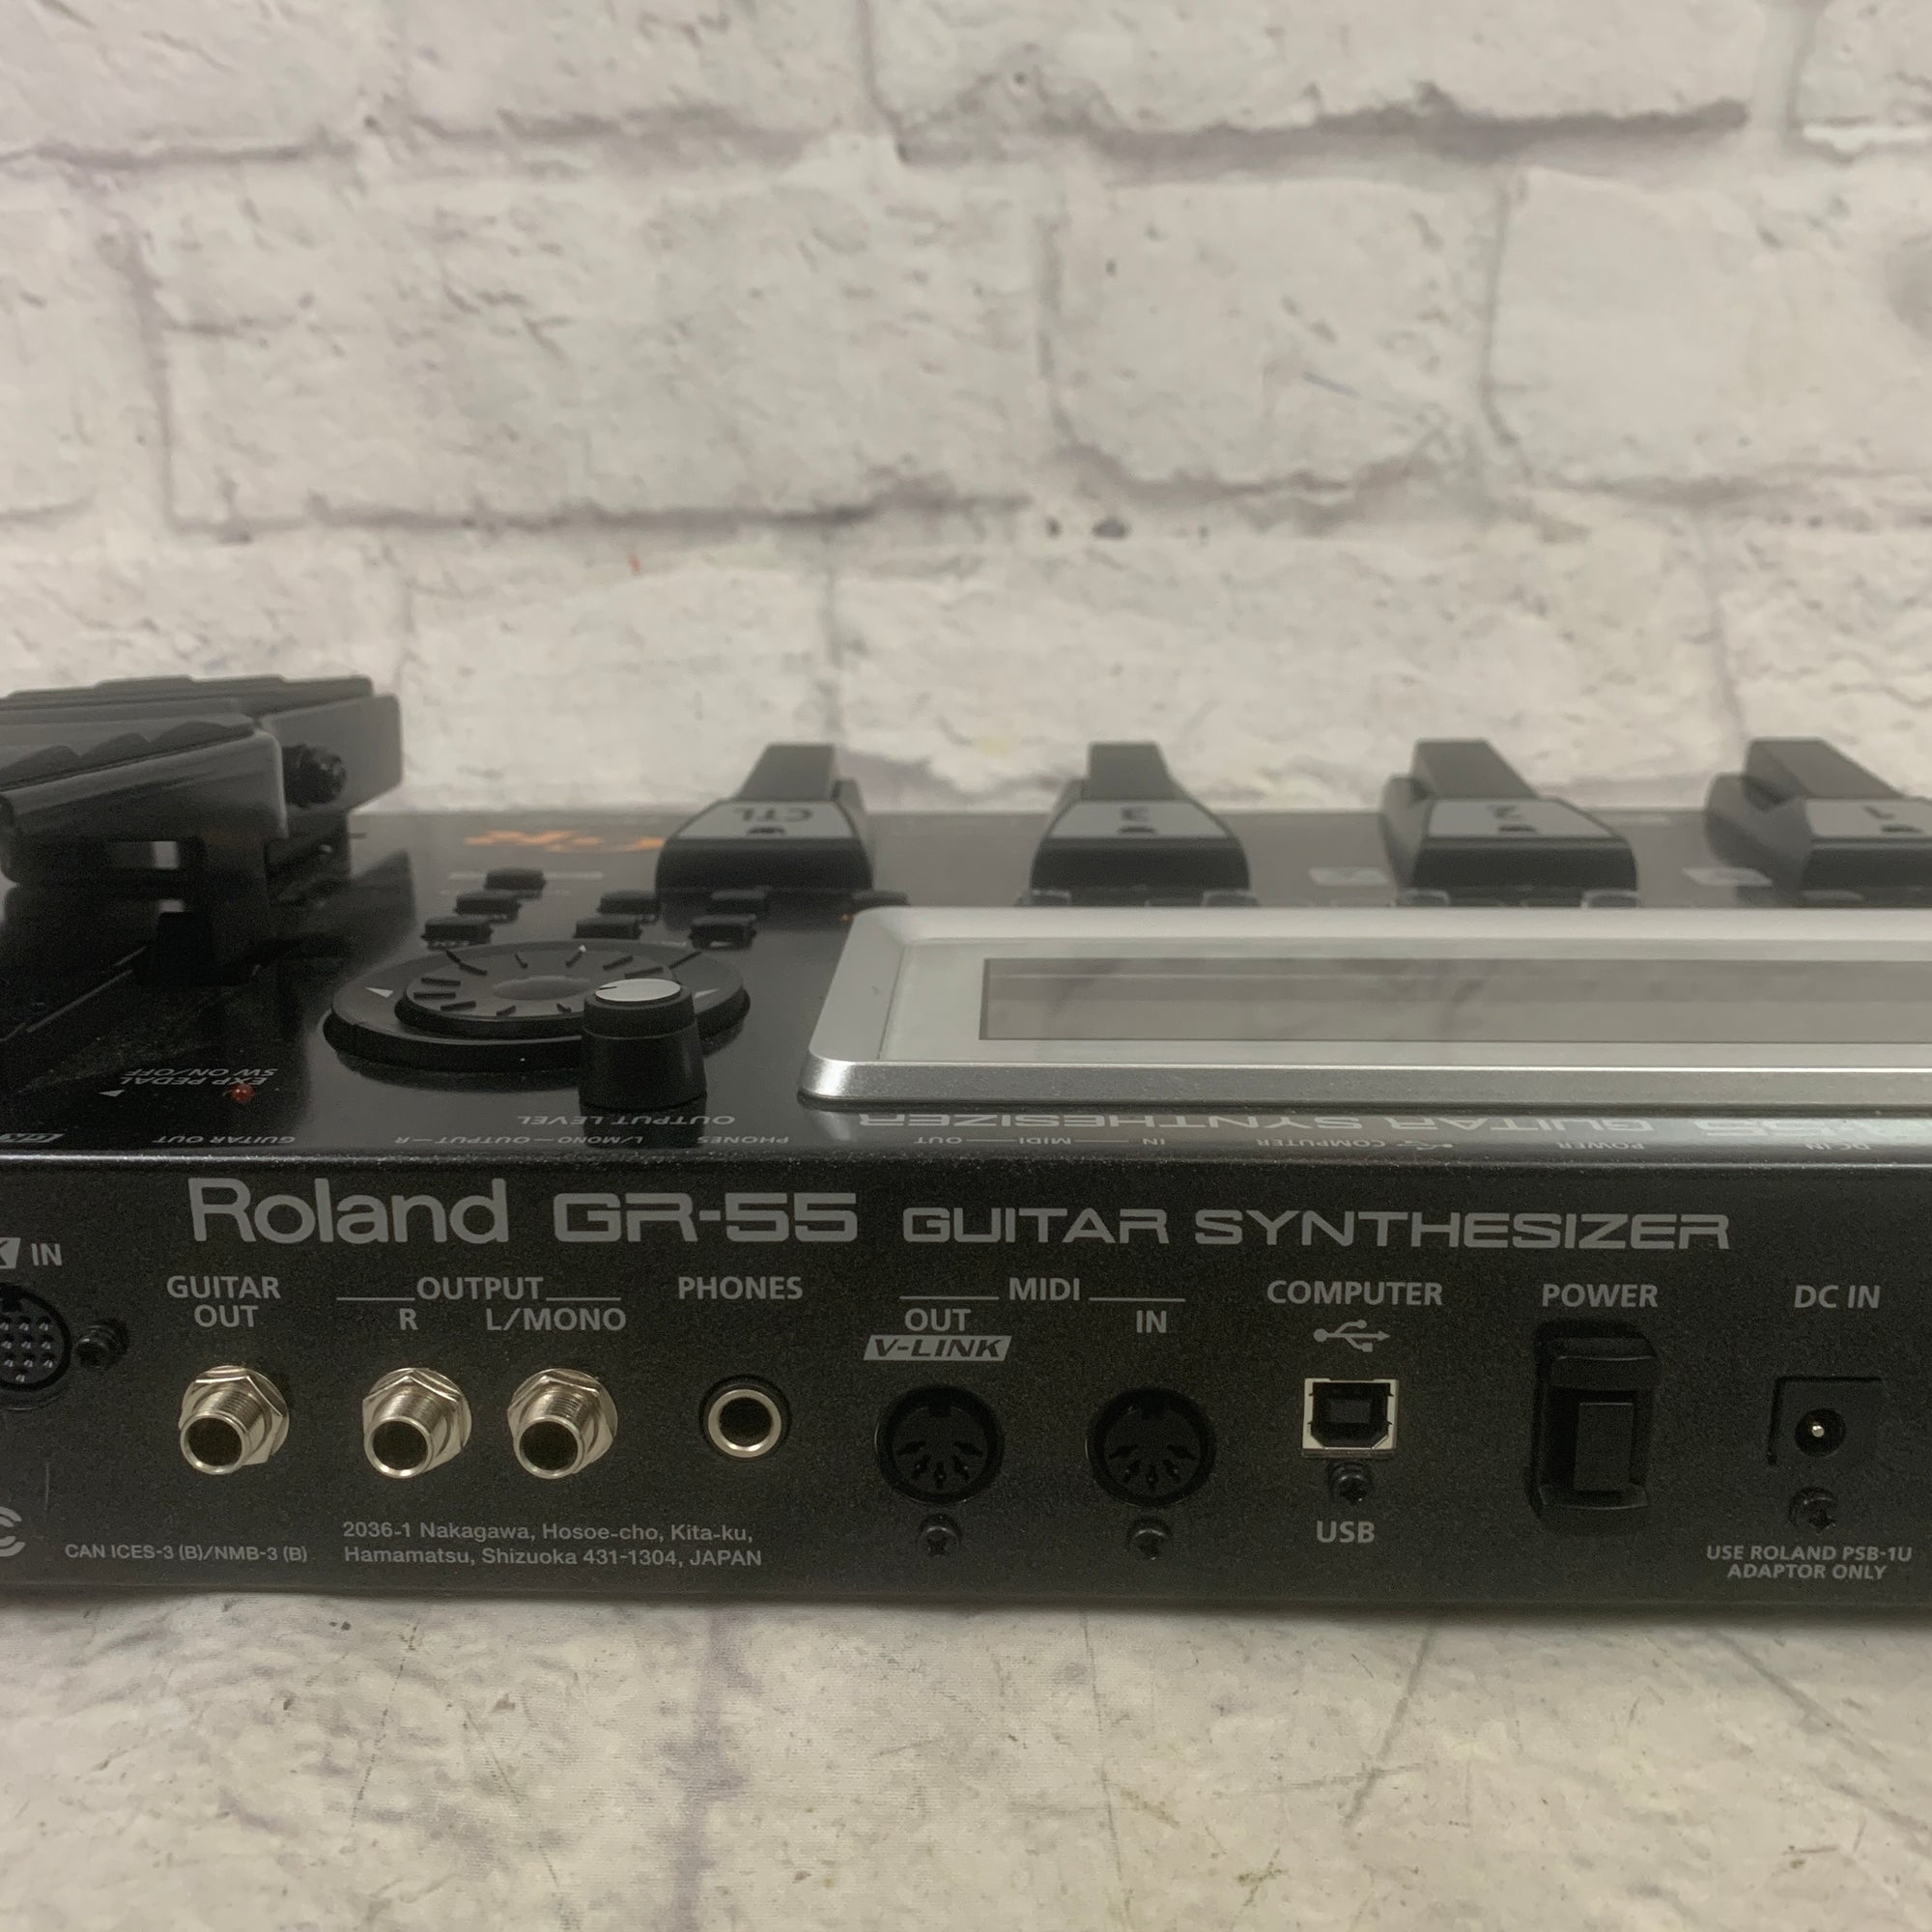 Roland GR-55 Guitar Synthesizer Multi-Effects Pedal Modeling Unit, Roland  Gr 55 Midi Out